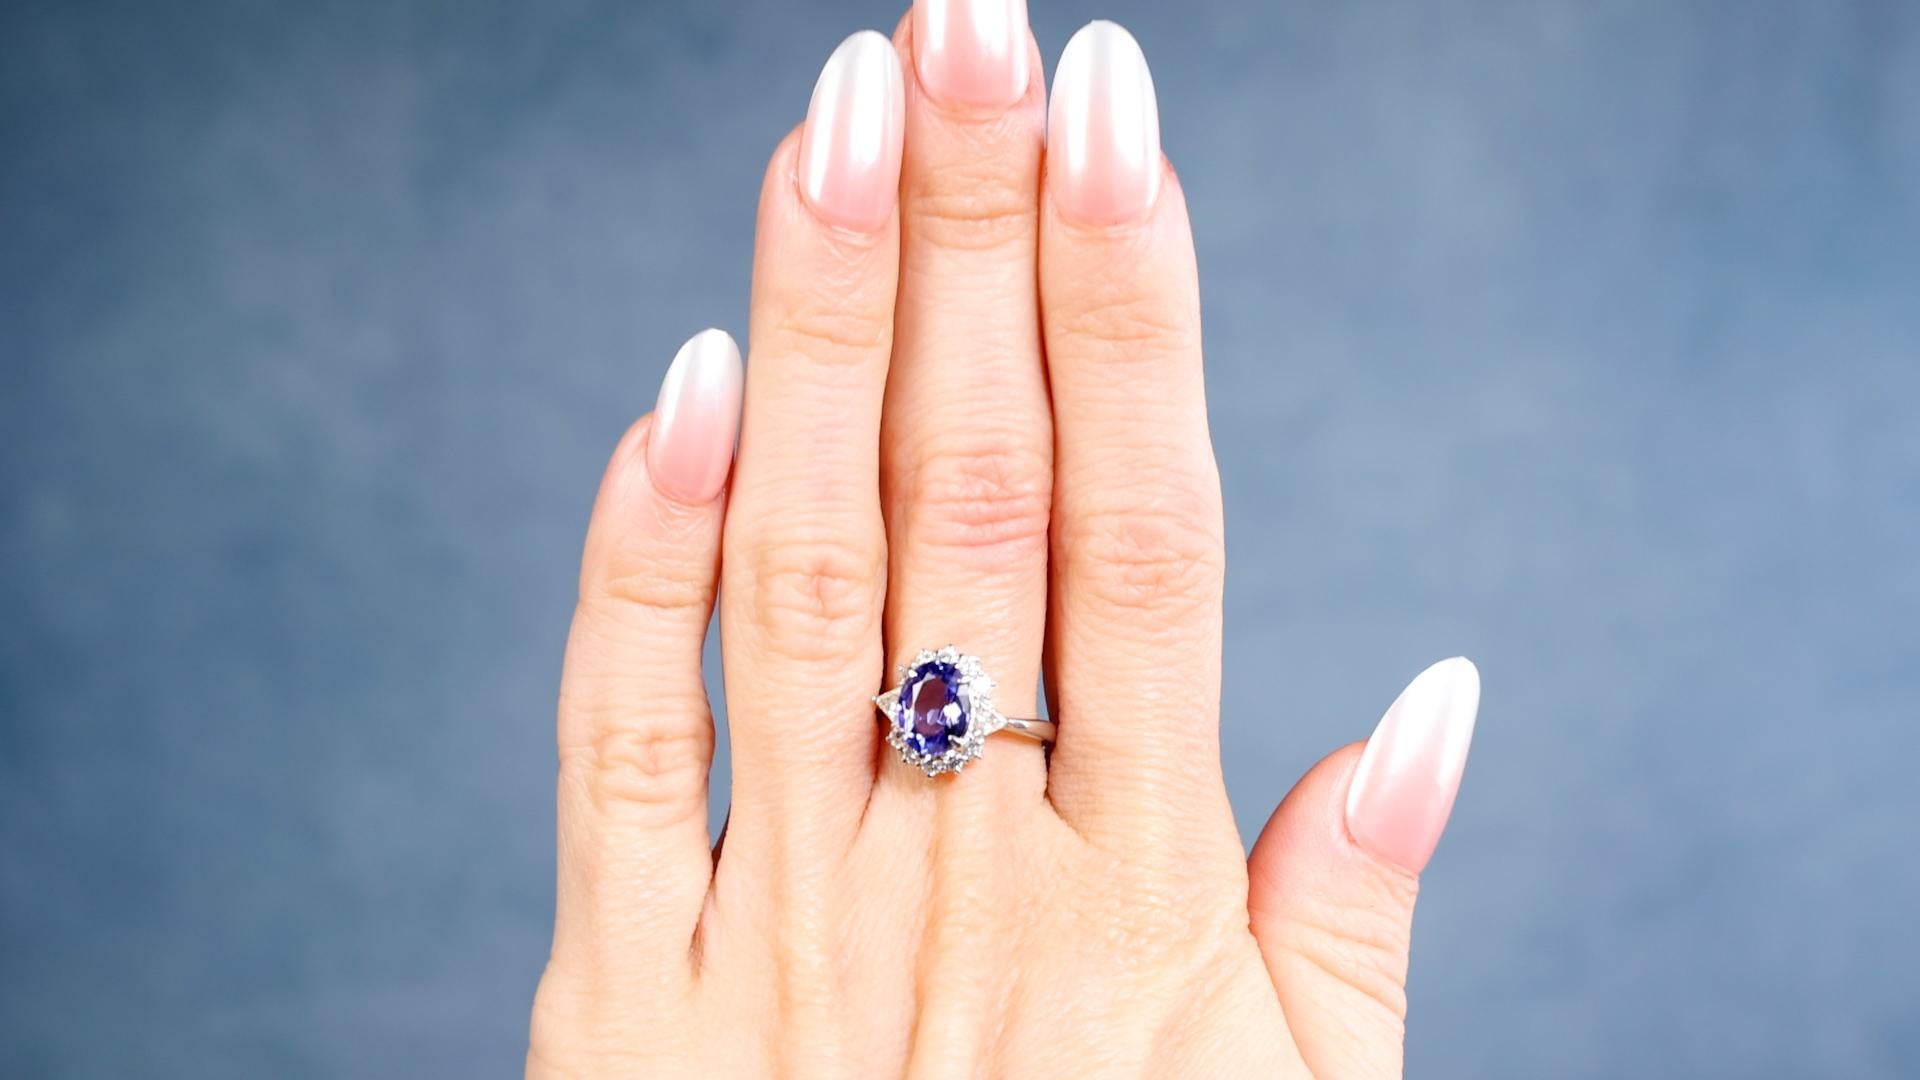 One Tanzanite Diamond Platinum Ring. Featuring one oval cut tanzanite of 1.63 carats. Accented by two trillion and ten round brilliant cut diamonds with a total weight of 0.60 carat, graded near-colorless, VS-SI clarity. Crafted in platinum with